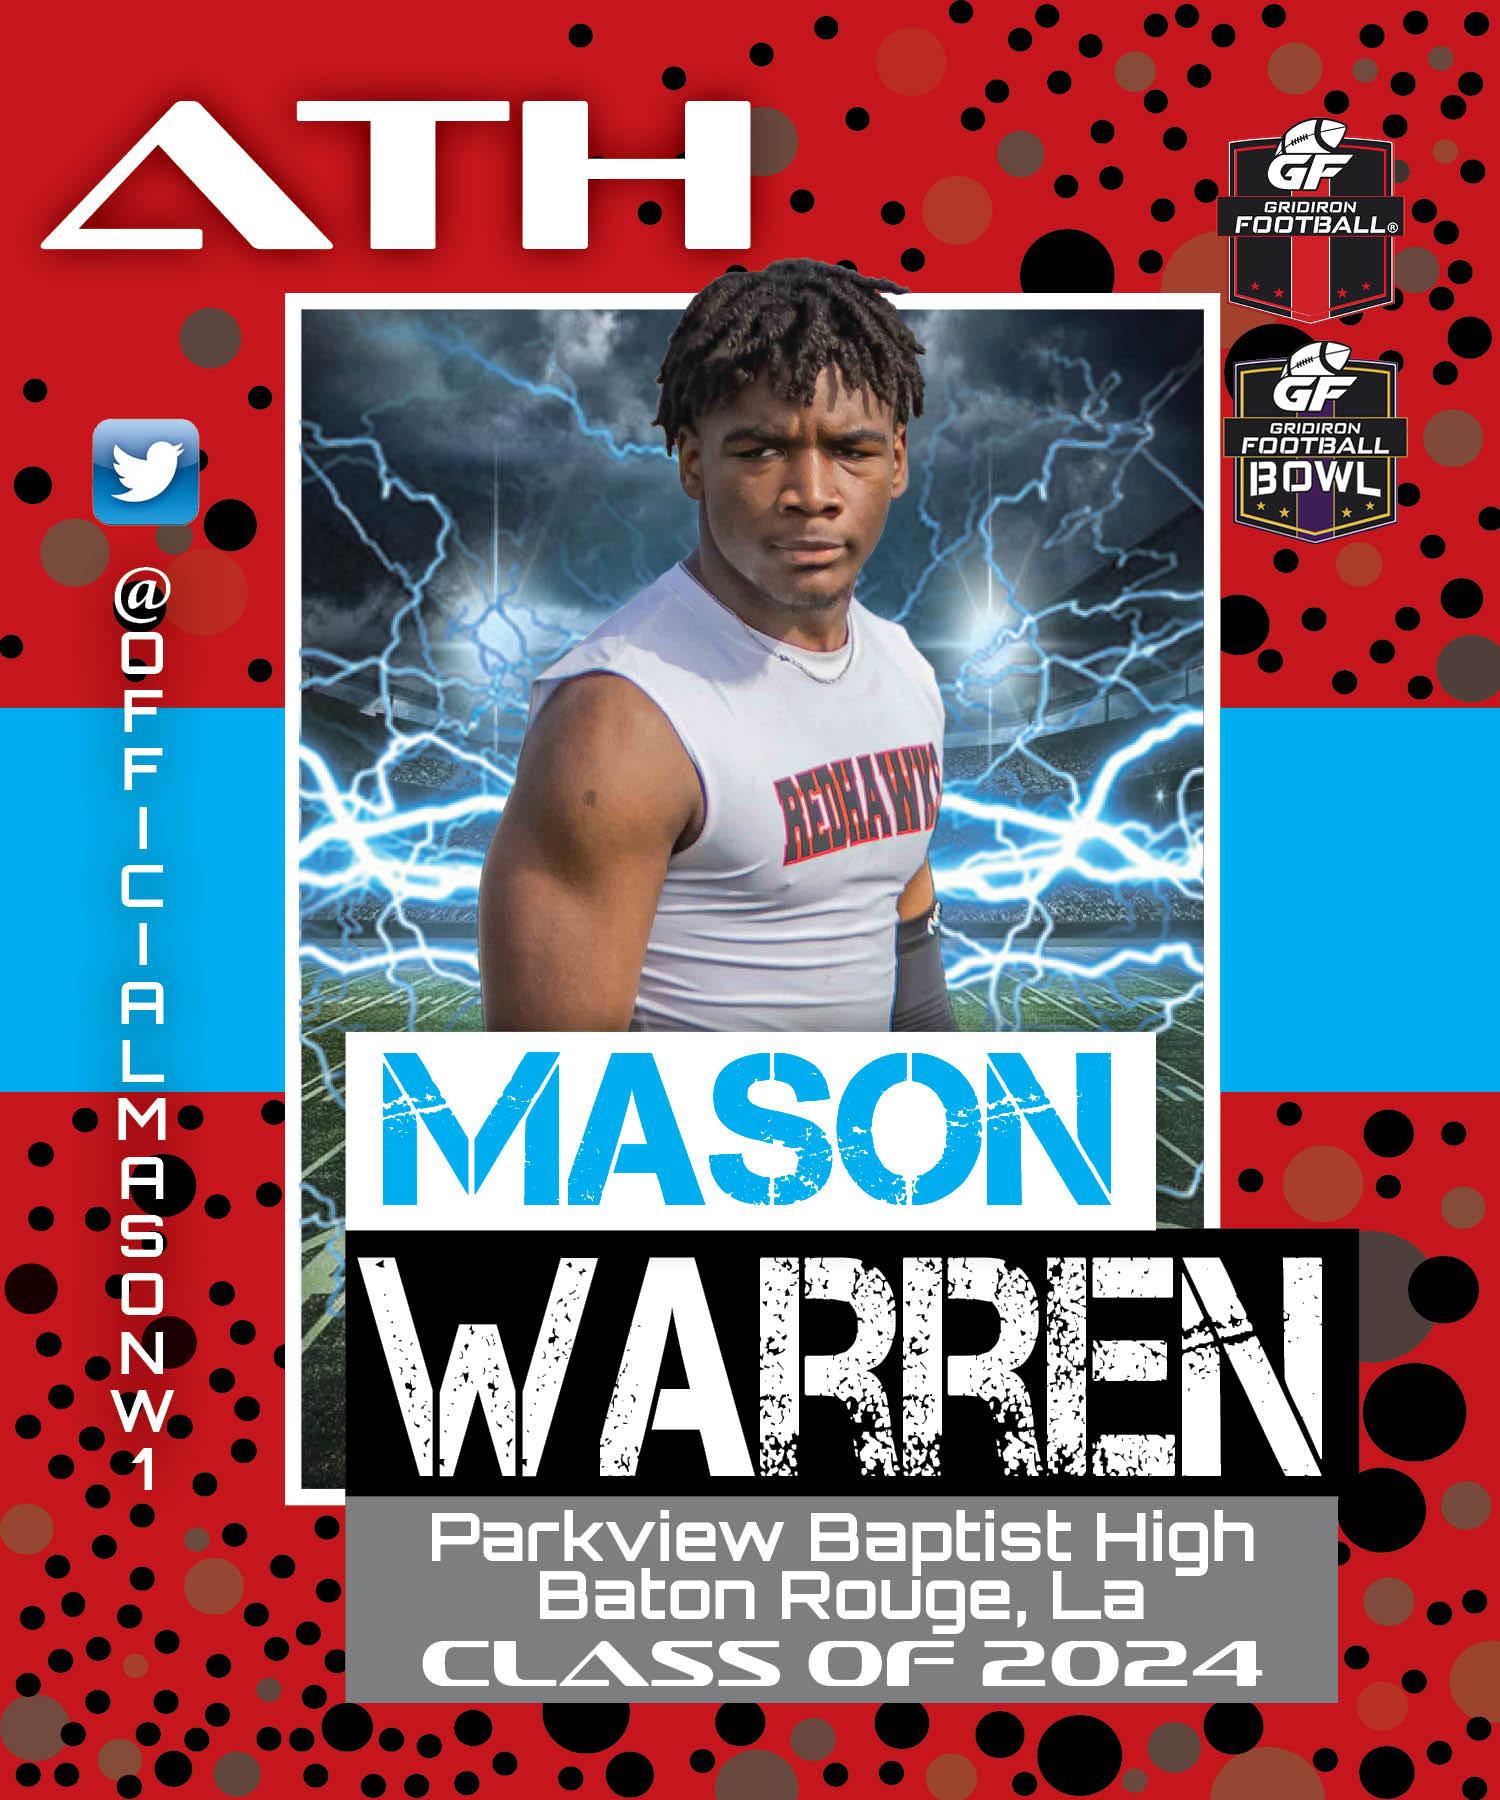 BREAKING NEWS: Parkview Baptist High School (Baton Rouge, LA) DB Mason Warren Commits To The Gridiron Football All-American Bowl Game